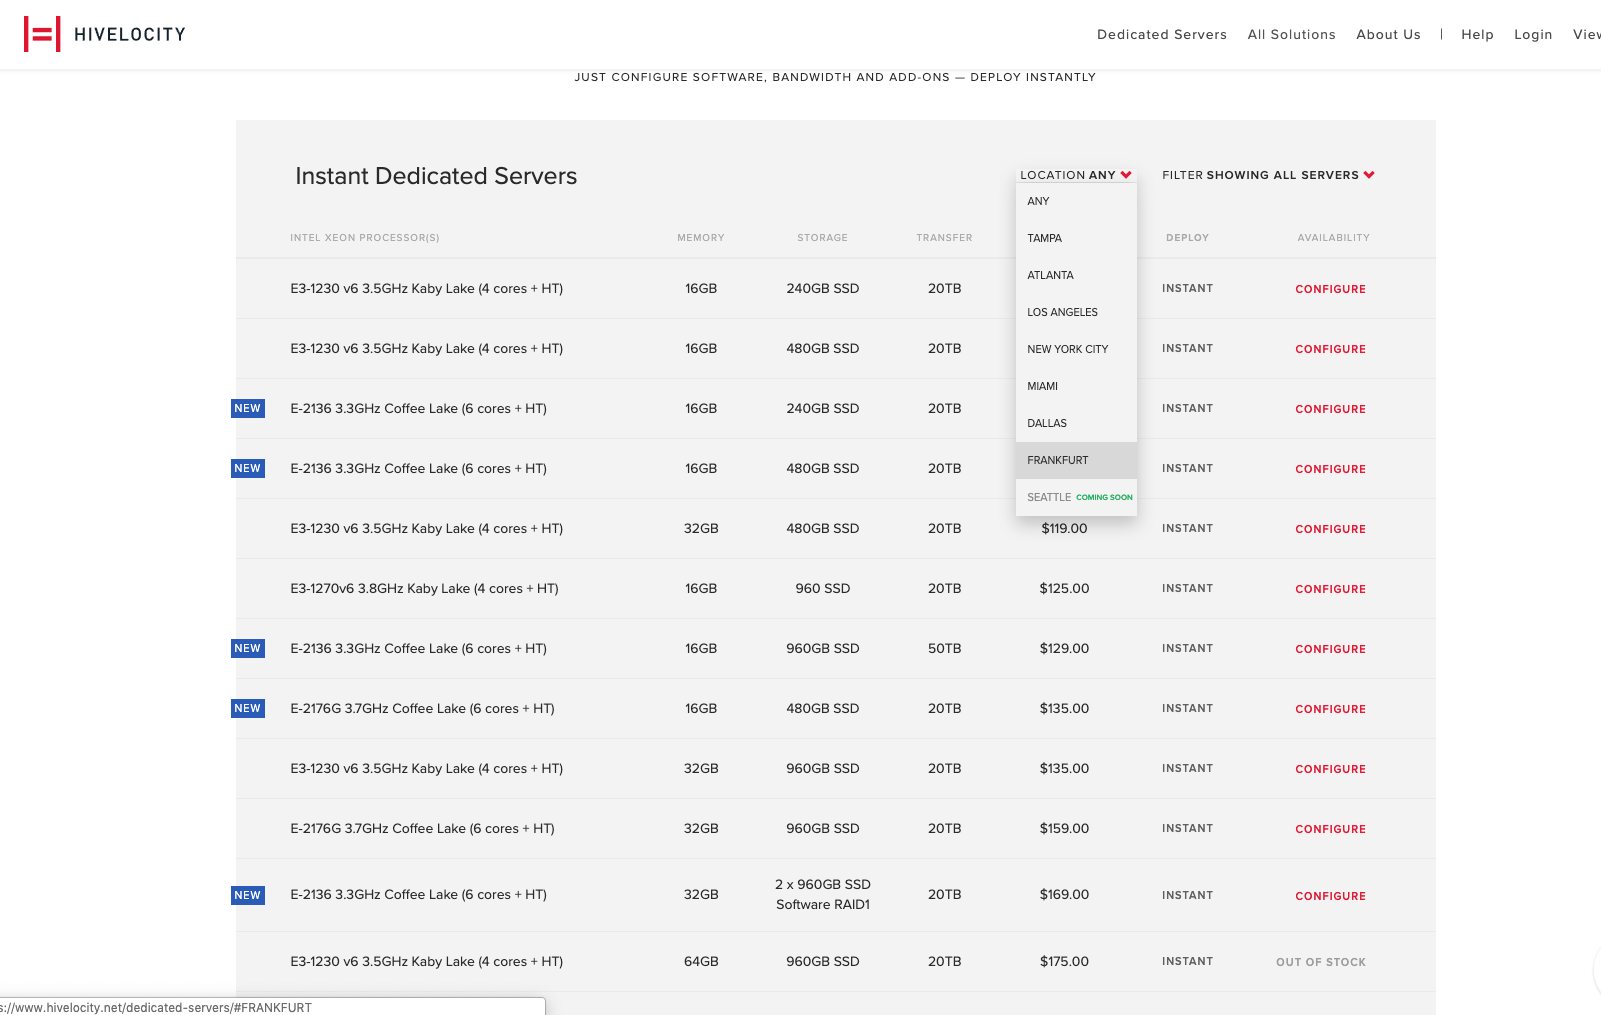 Screenshot of the Hivelocity Instant Deployment Servers page